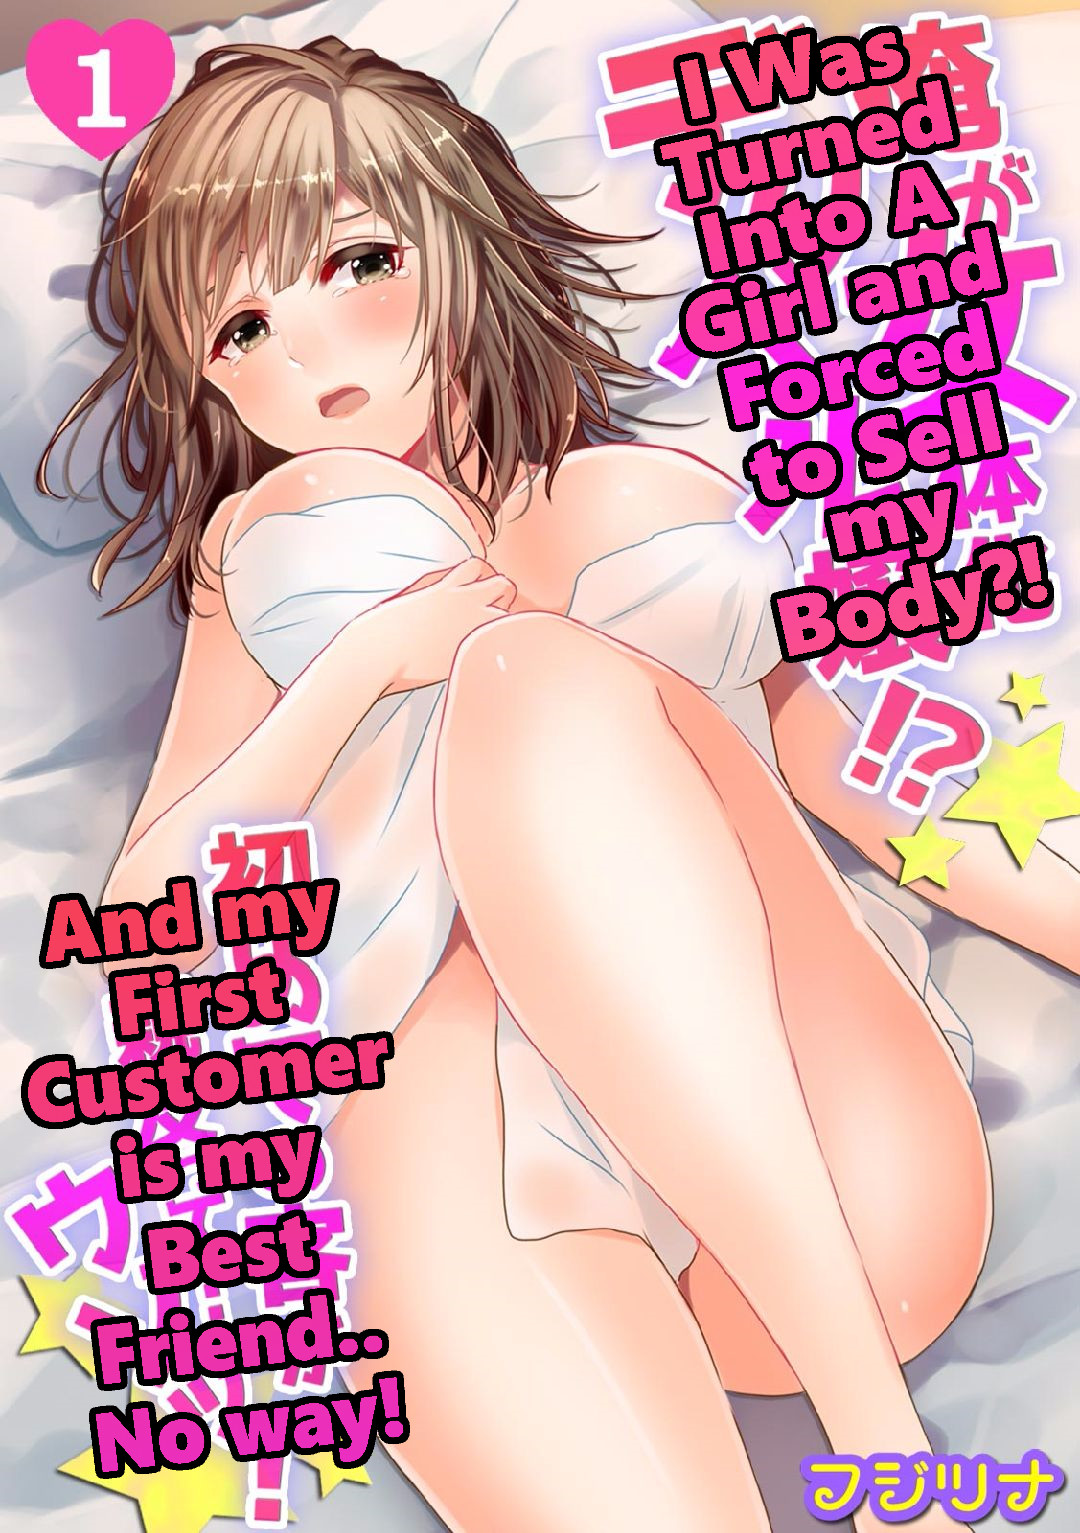 Hentai Manga Comic-I Was Turned Into A Girl and Forced to Sell My Body?! And My First Customer is My Best Friend.. No Way! 1-Read-1